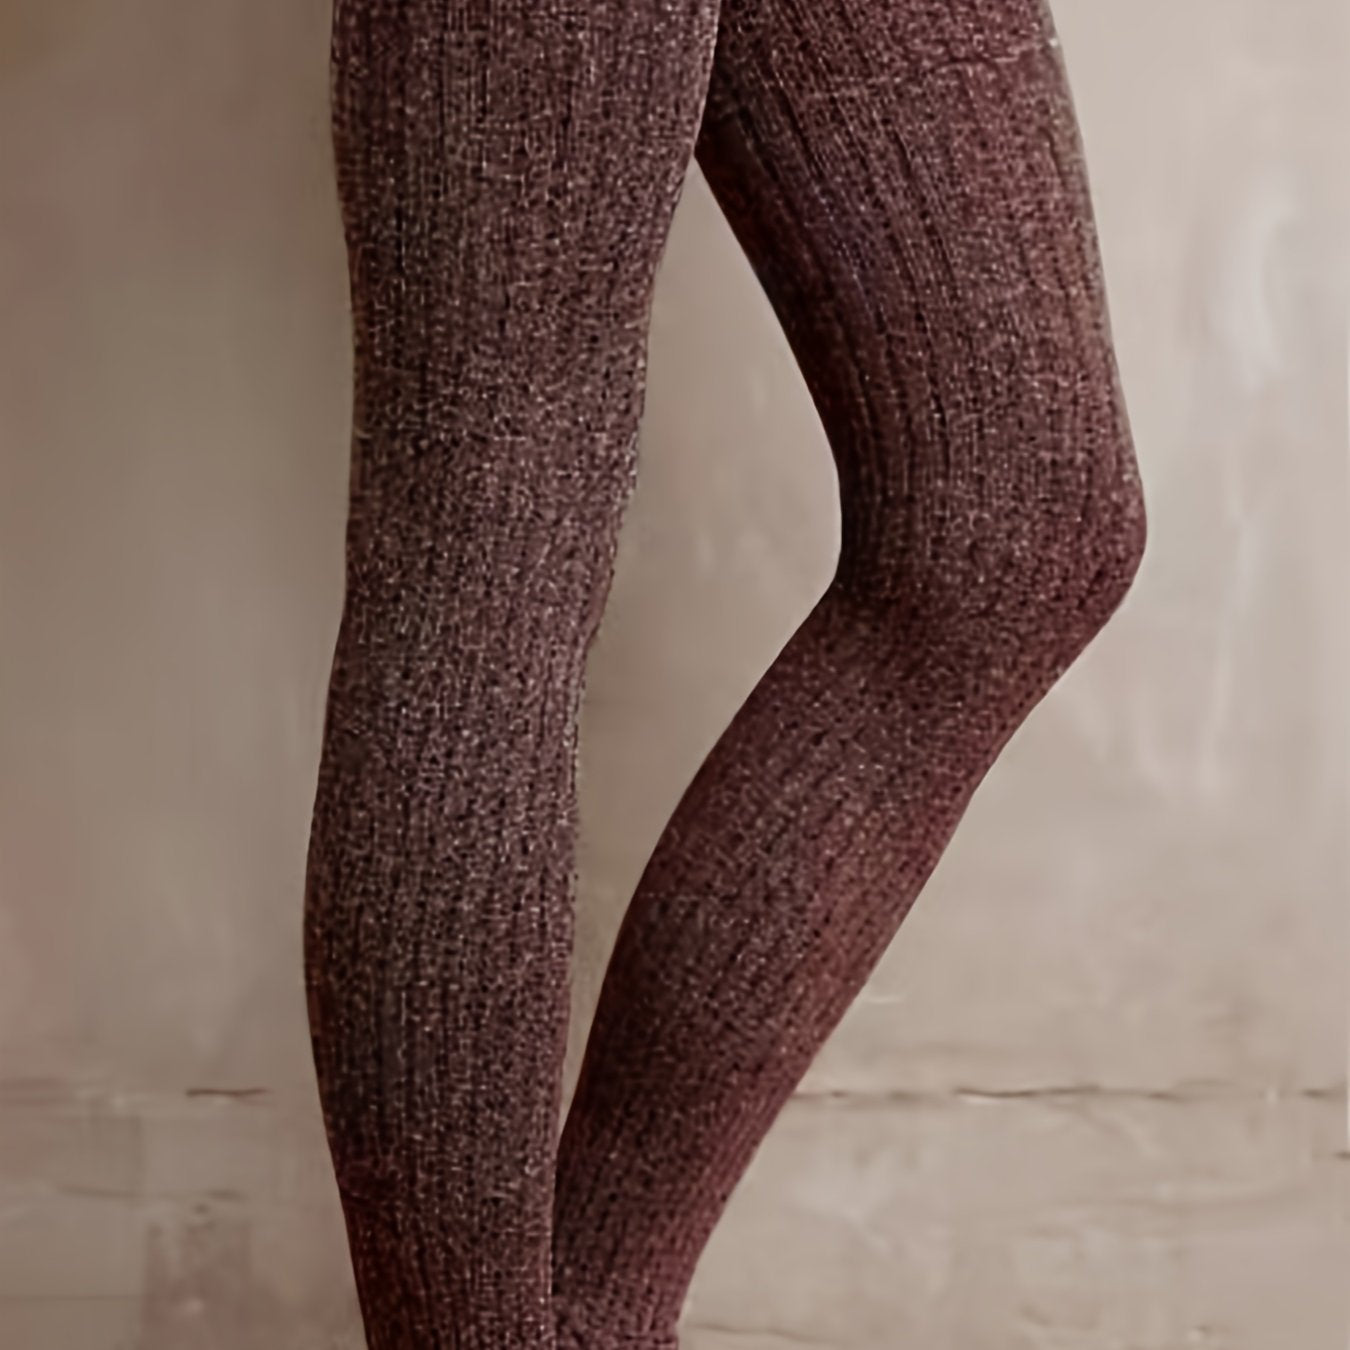 Solid Ribbed Knit Leggings